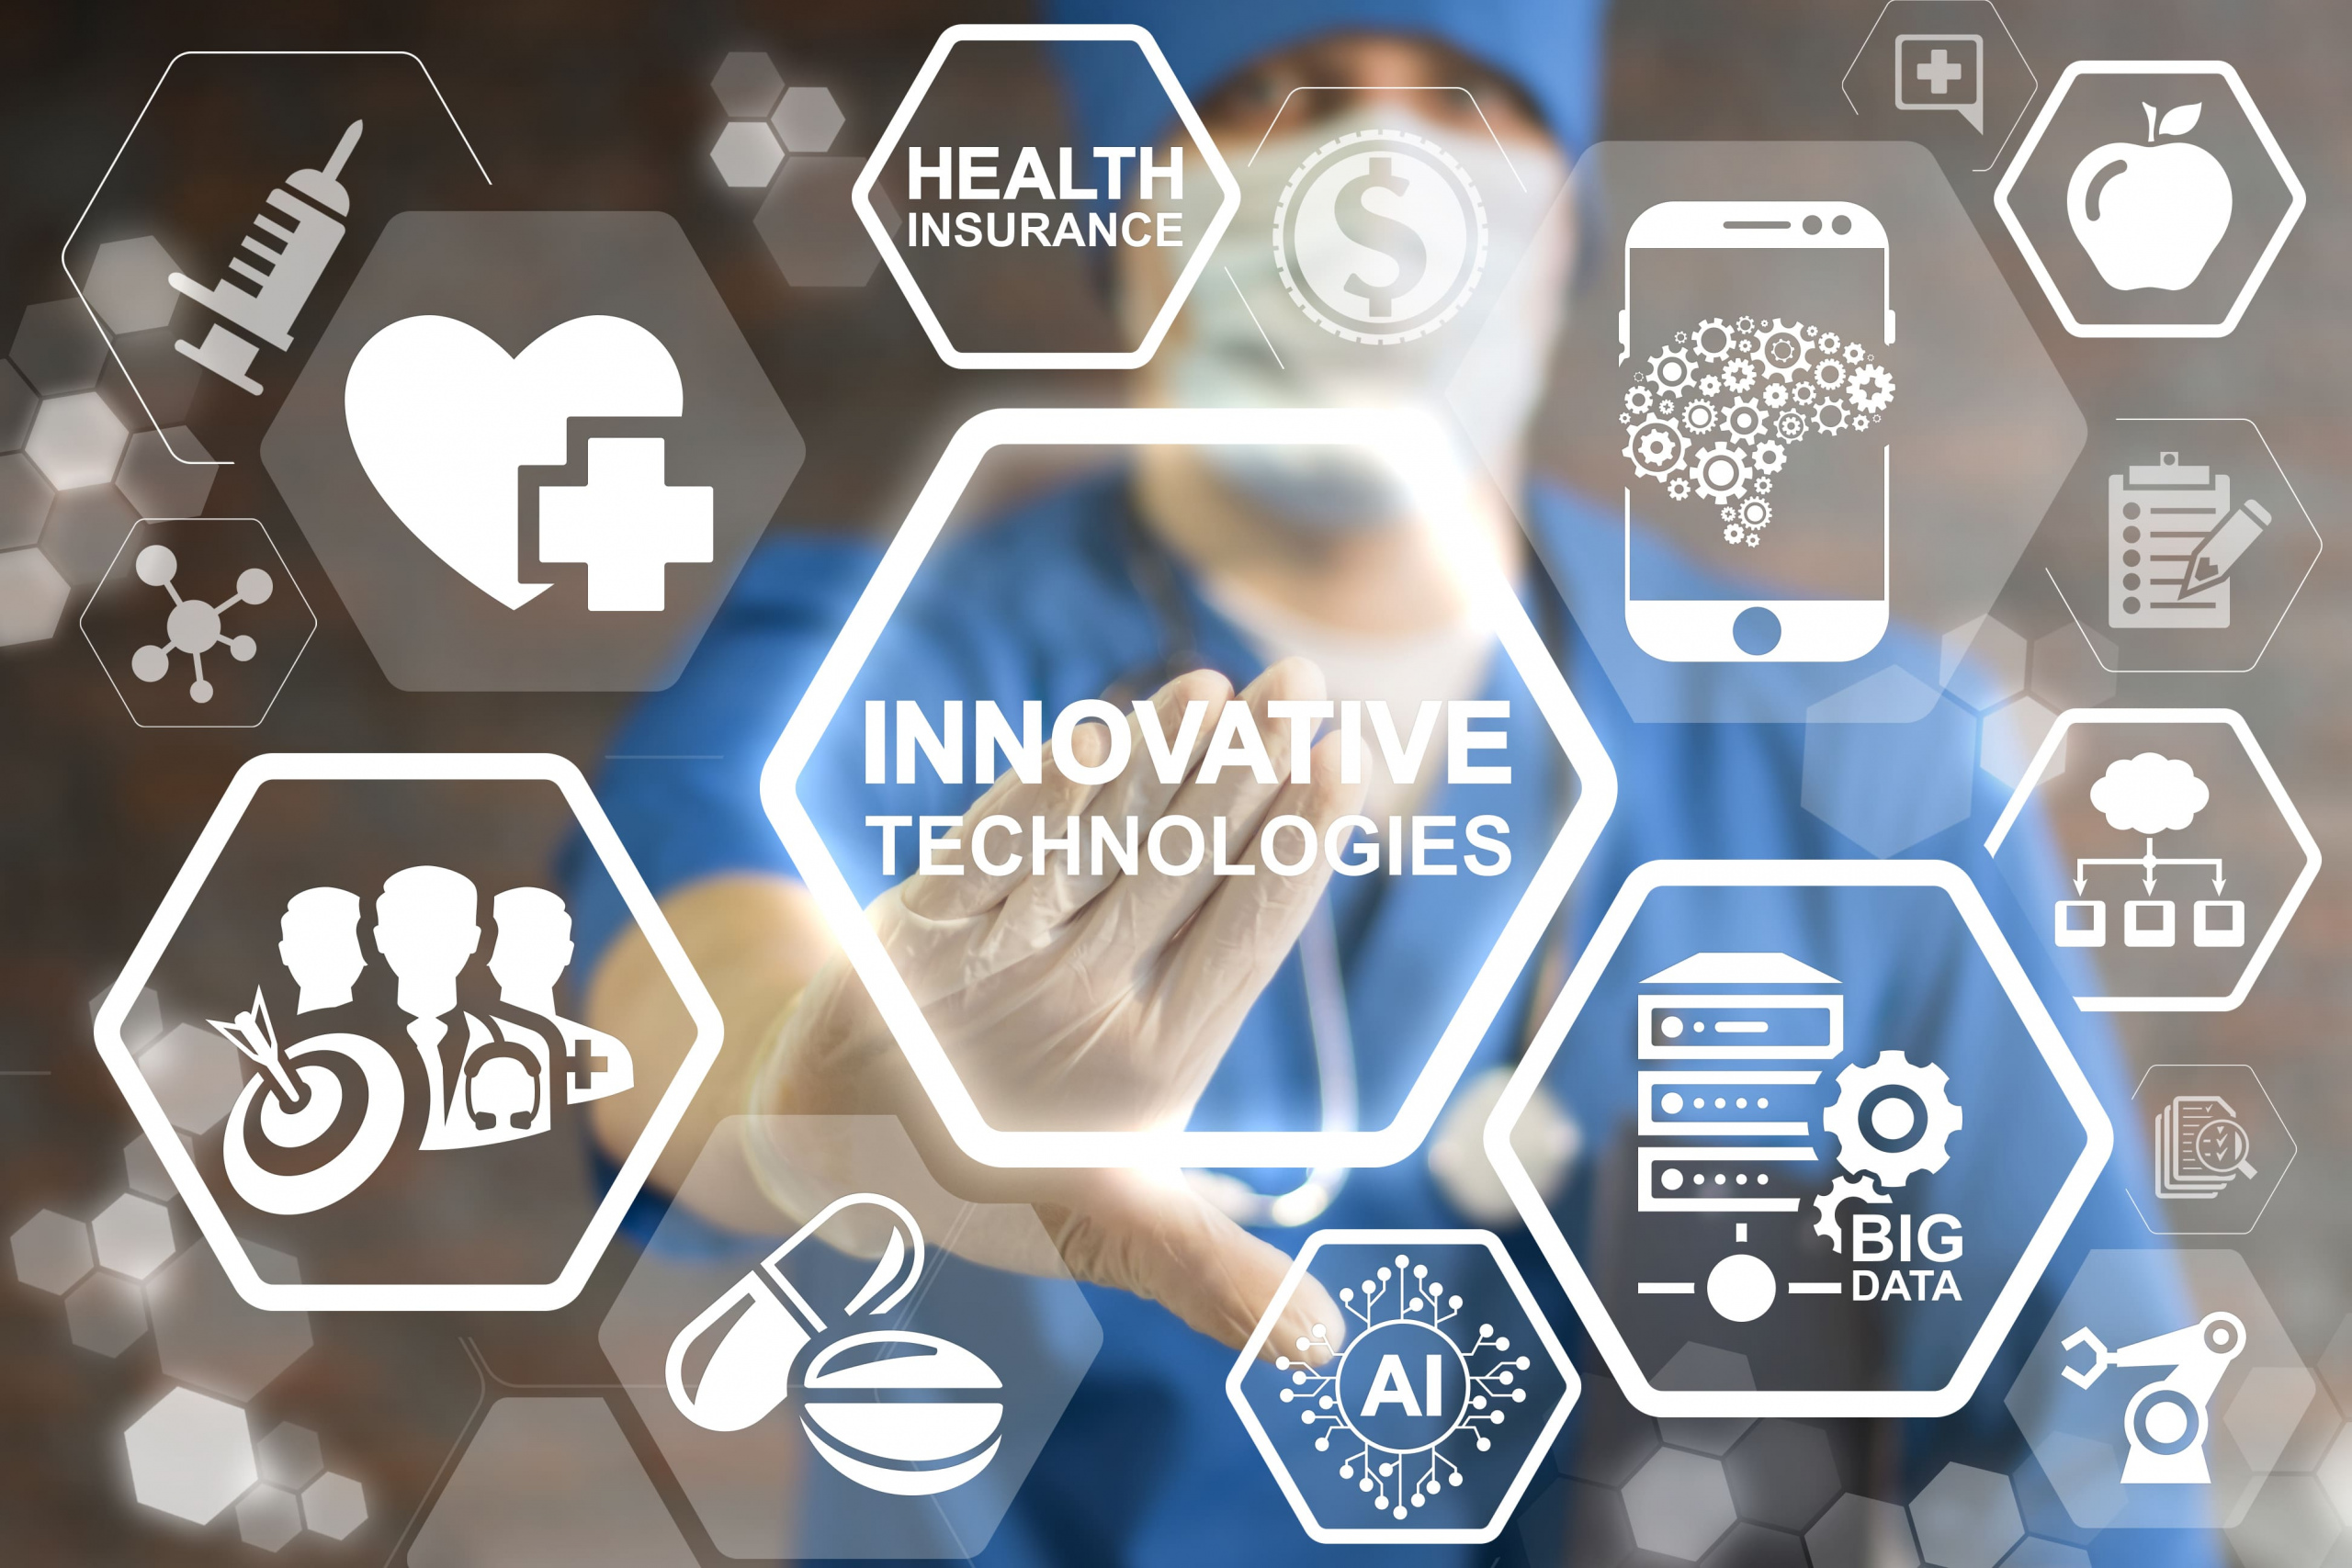 Health Care Innovations Drive Change, Helping Achieve More with Less